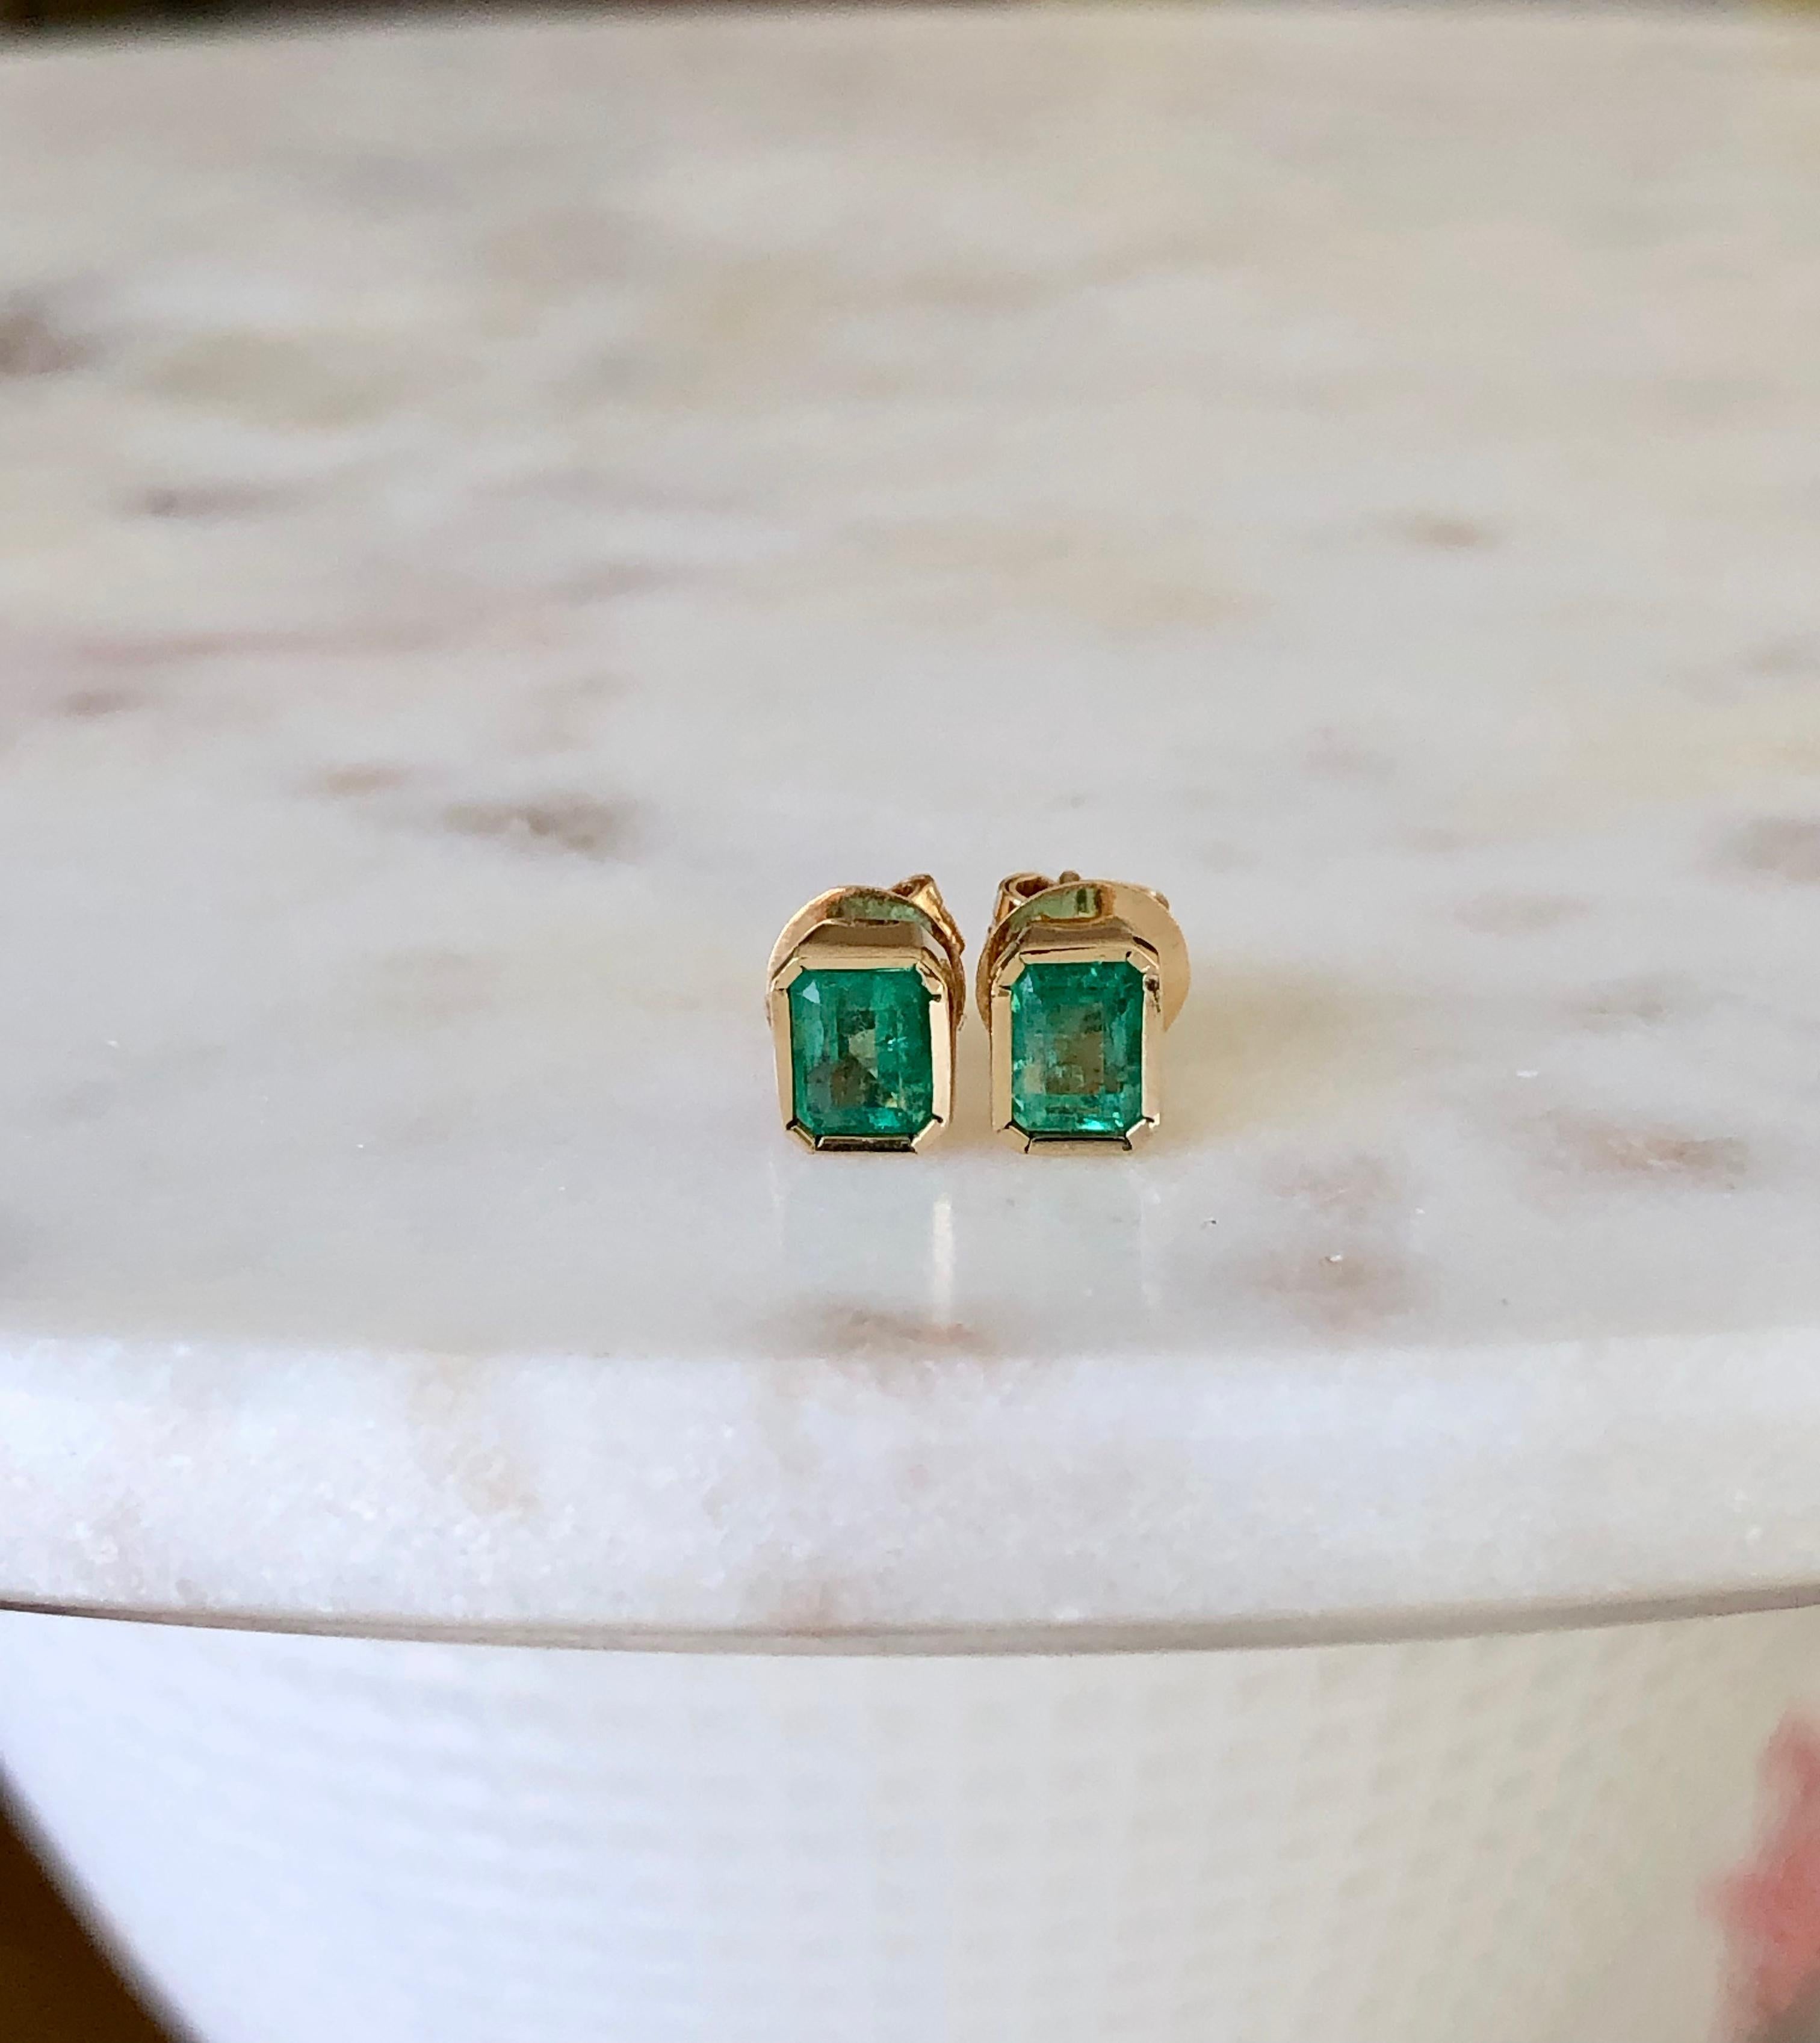 Colombian Emerald Studs Earrings 18K 
Average Color/Clarity : Fine Medium Green/ Clarity VS
Total Weight :  Approx 1.28 carats (2 Emerald) 
Earrings Measurement: 6.80mm x 5.30mm
Style: Bezel set / Push Backs
Composition: Yellow Gold 18K
Condition: